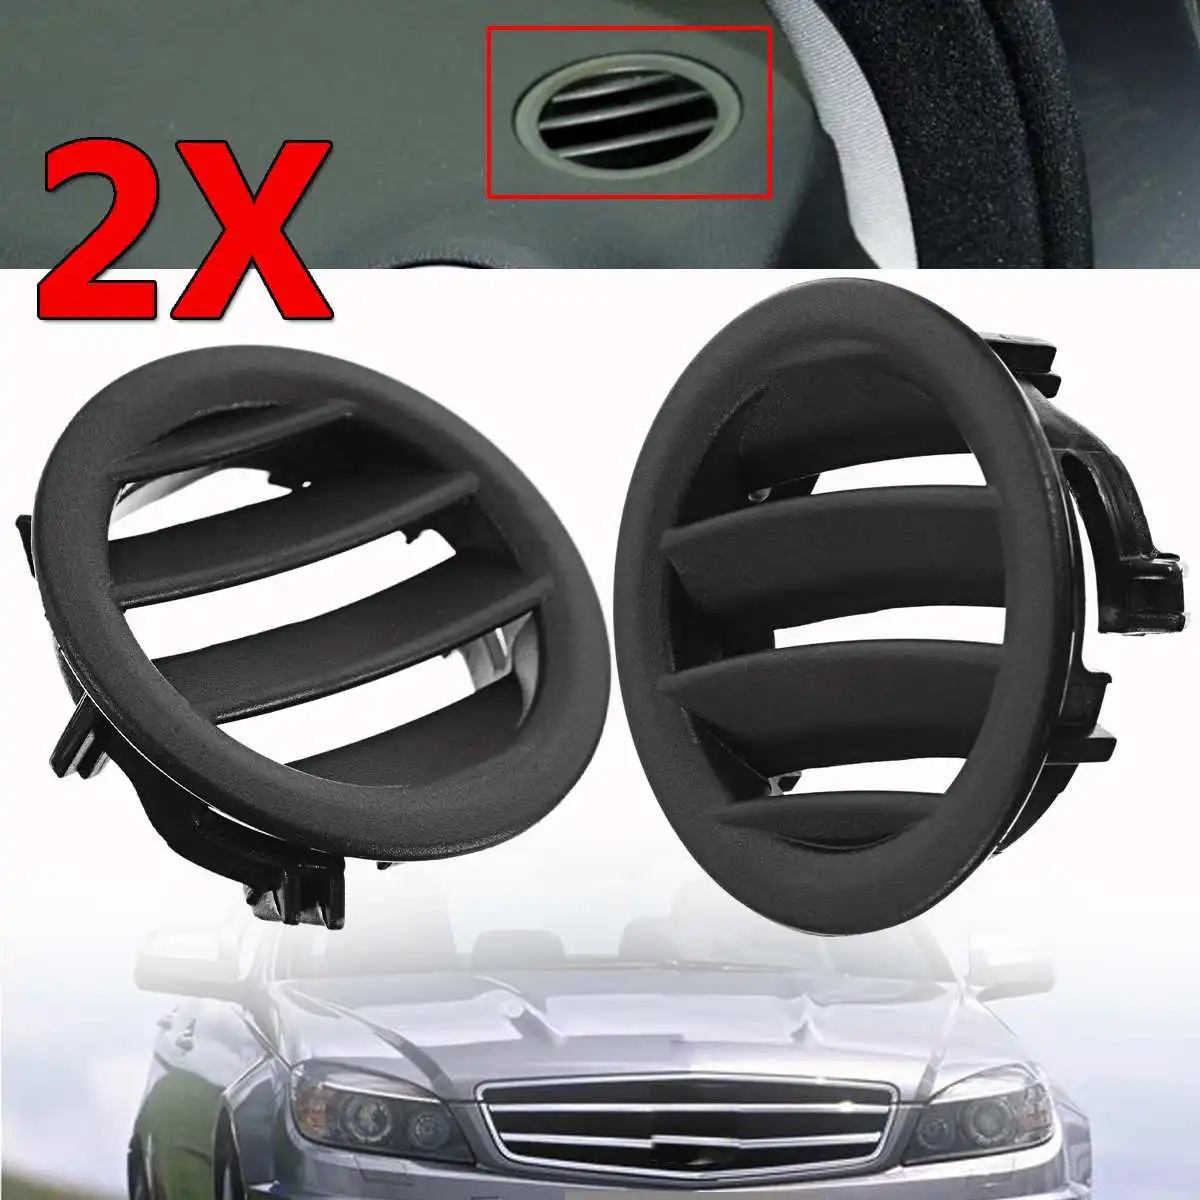 

Left / Right Air Vent W204 Car Air Ac Vent Grille Cover Tabs For Mercedes W204 C300 C350 C630 C class 2008 2009 2010 2011